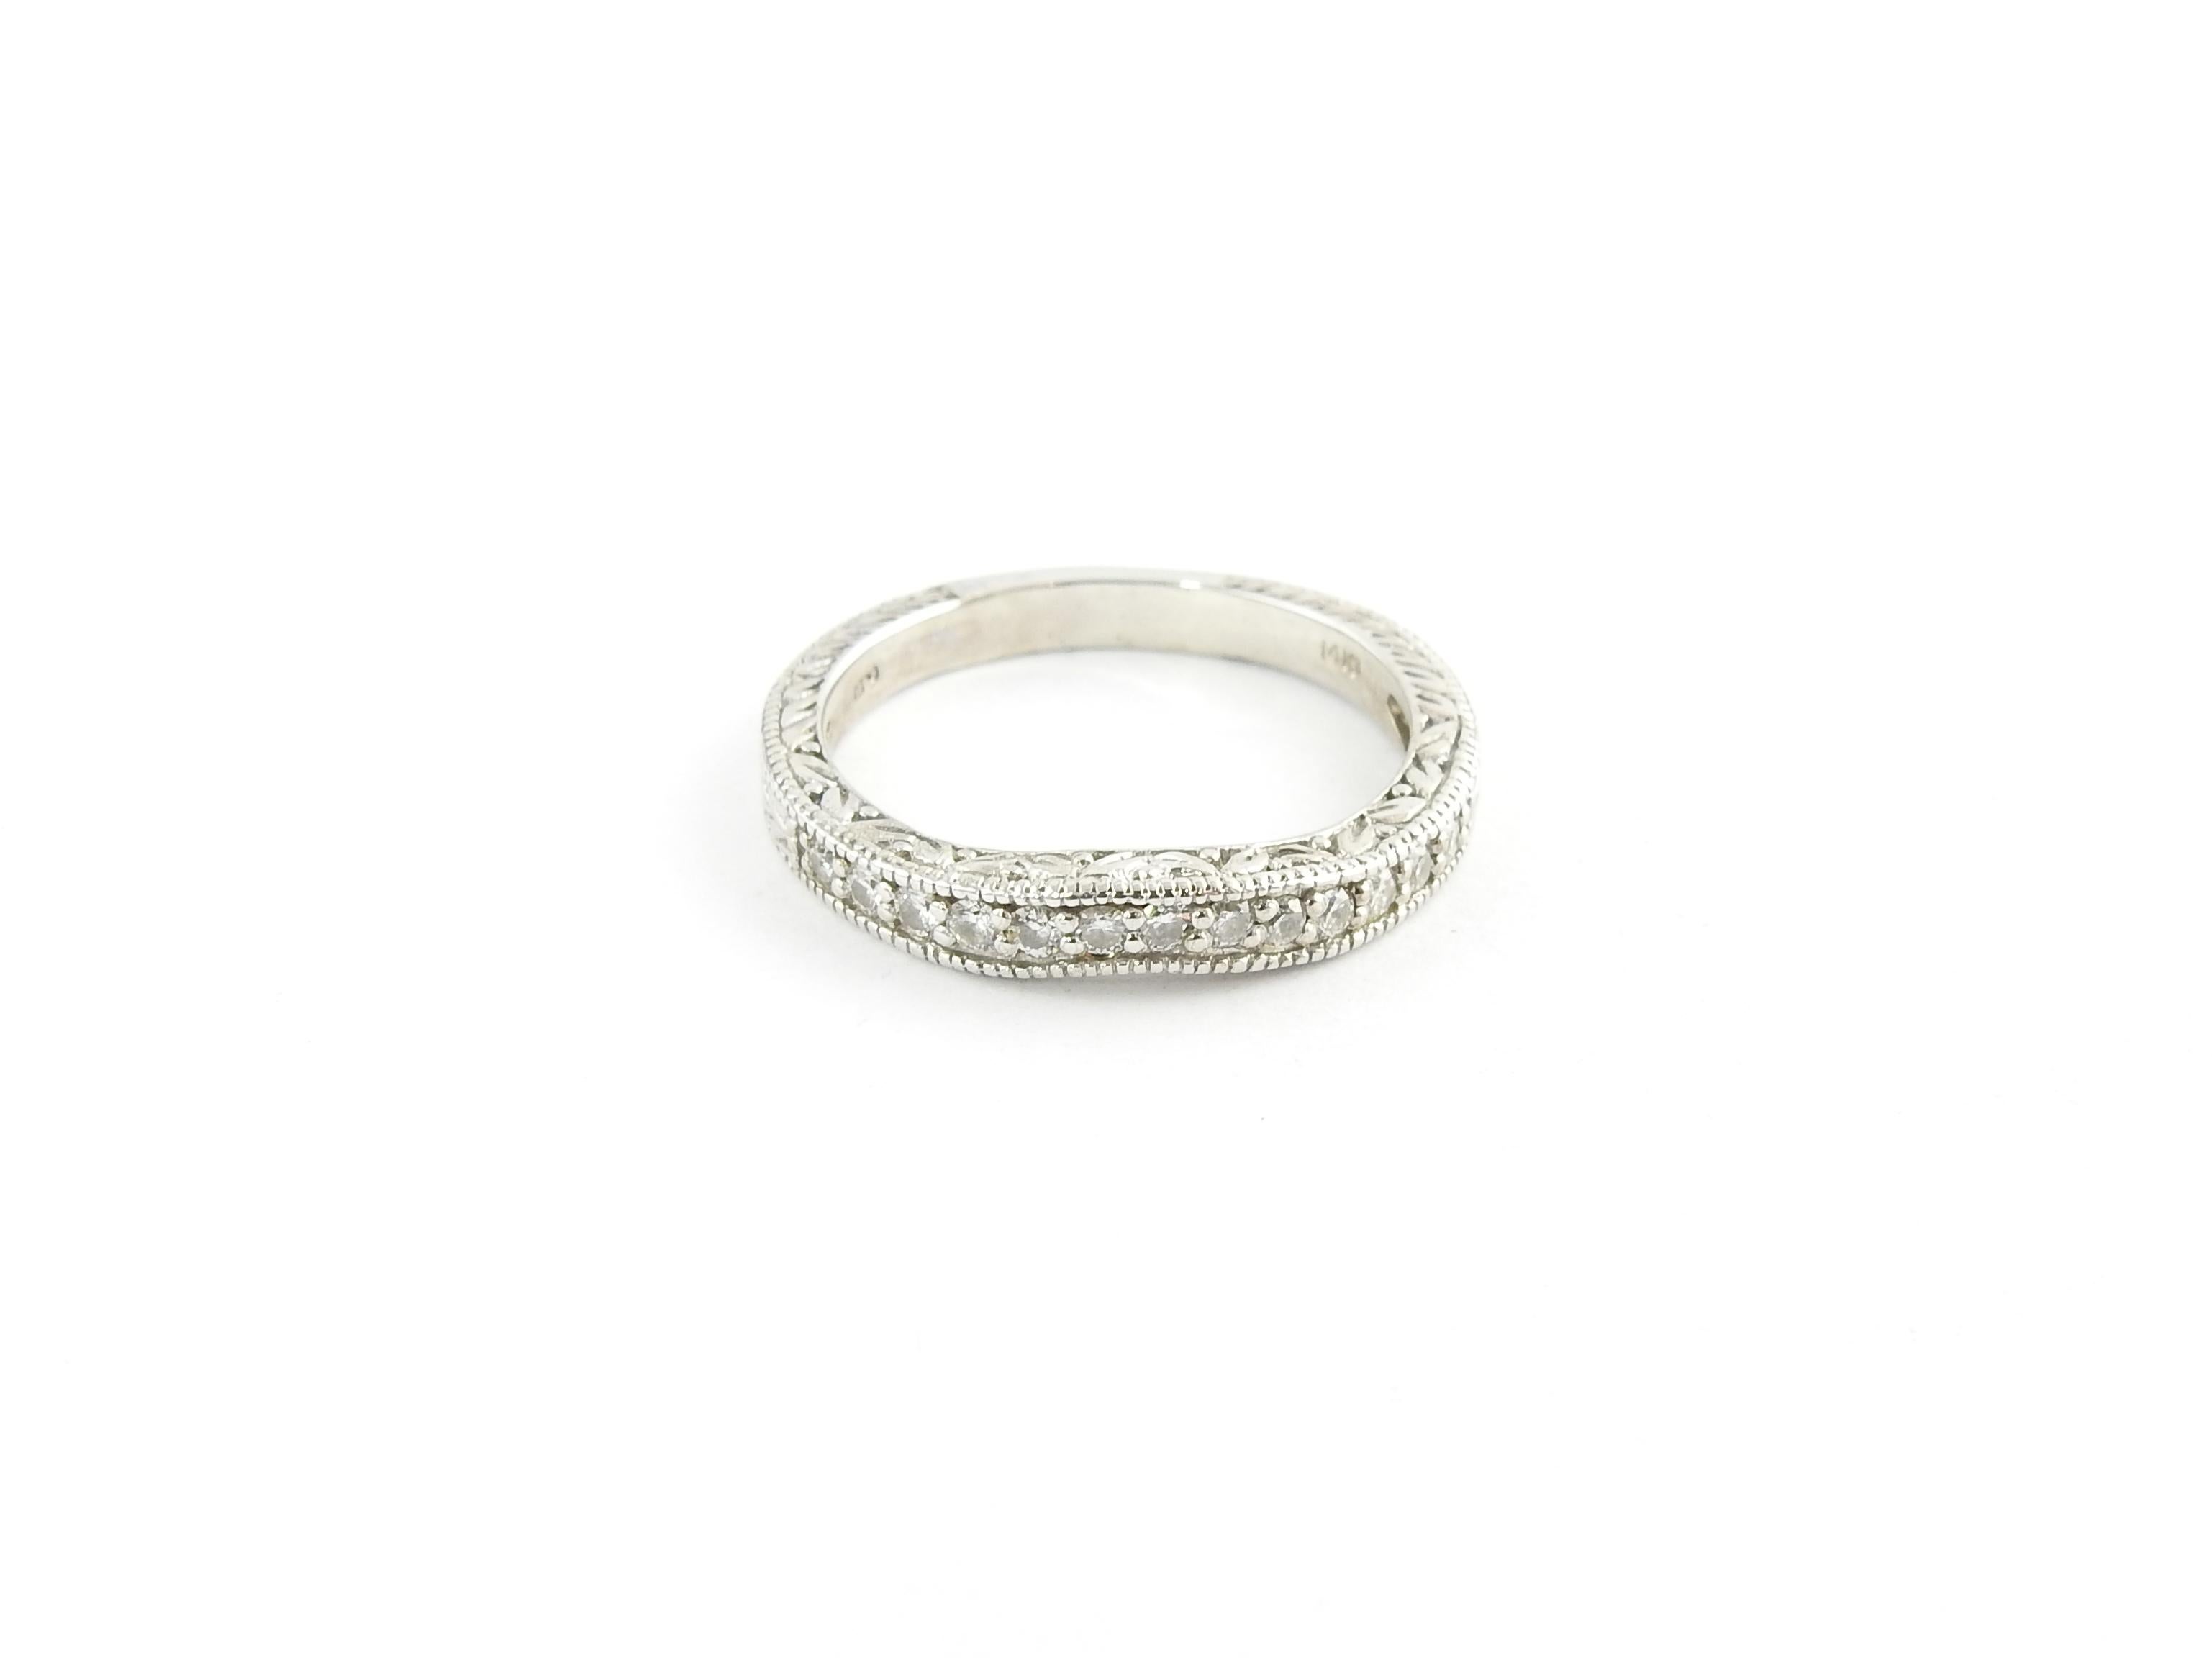 Vintage 14 Karat White Gold Diamond Wedding Band Size 7.5

This sparkling wedding band features 13 round brilliant cut diamonds set in a stunning curved design. Set in beautifully detailed 14K white gold.

Width: 3 mm. Shank: 2.5 mm.

Approximate